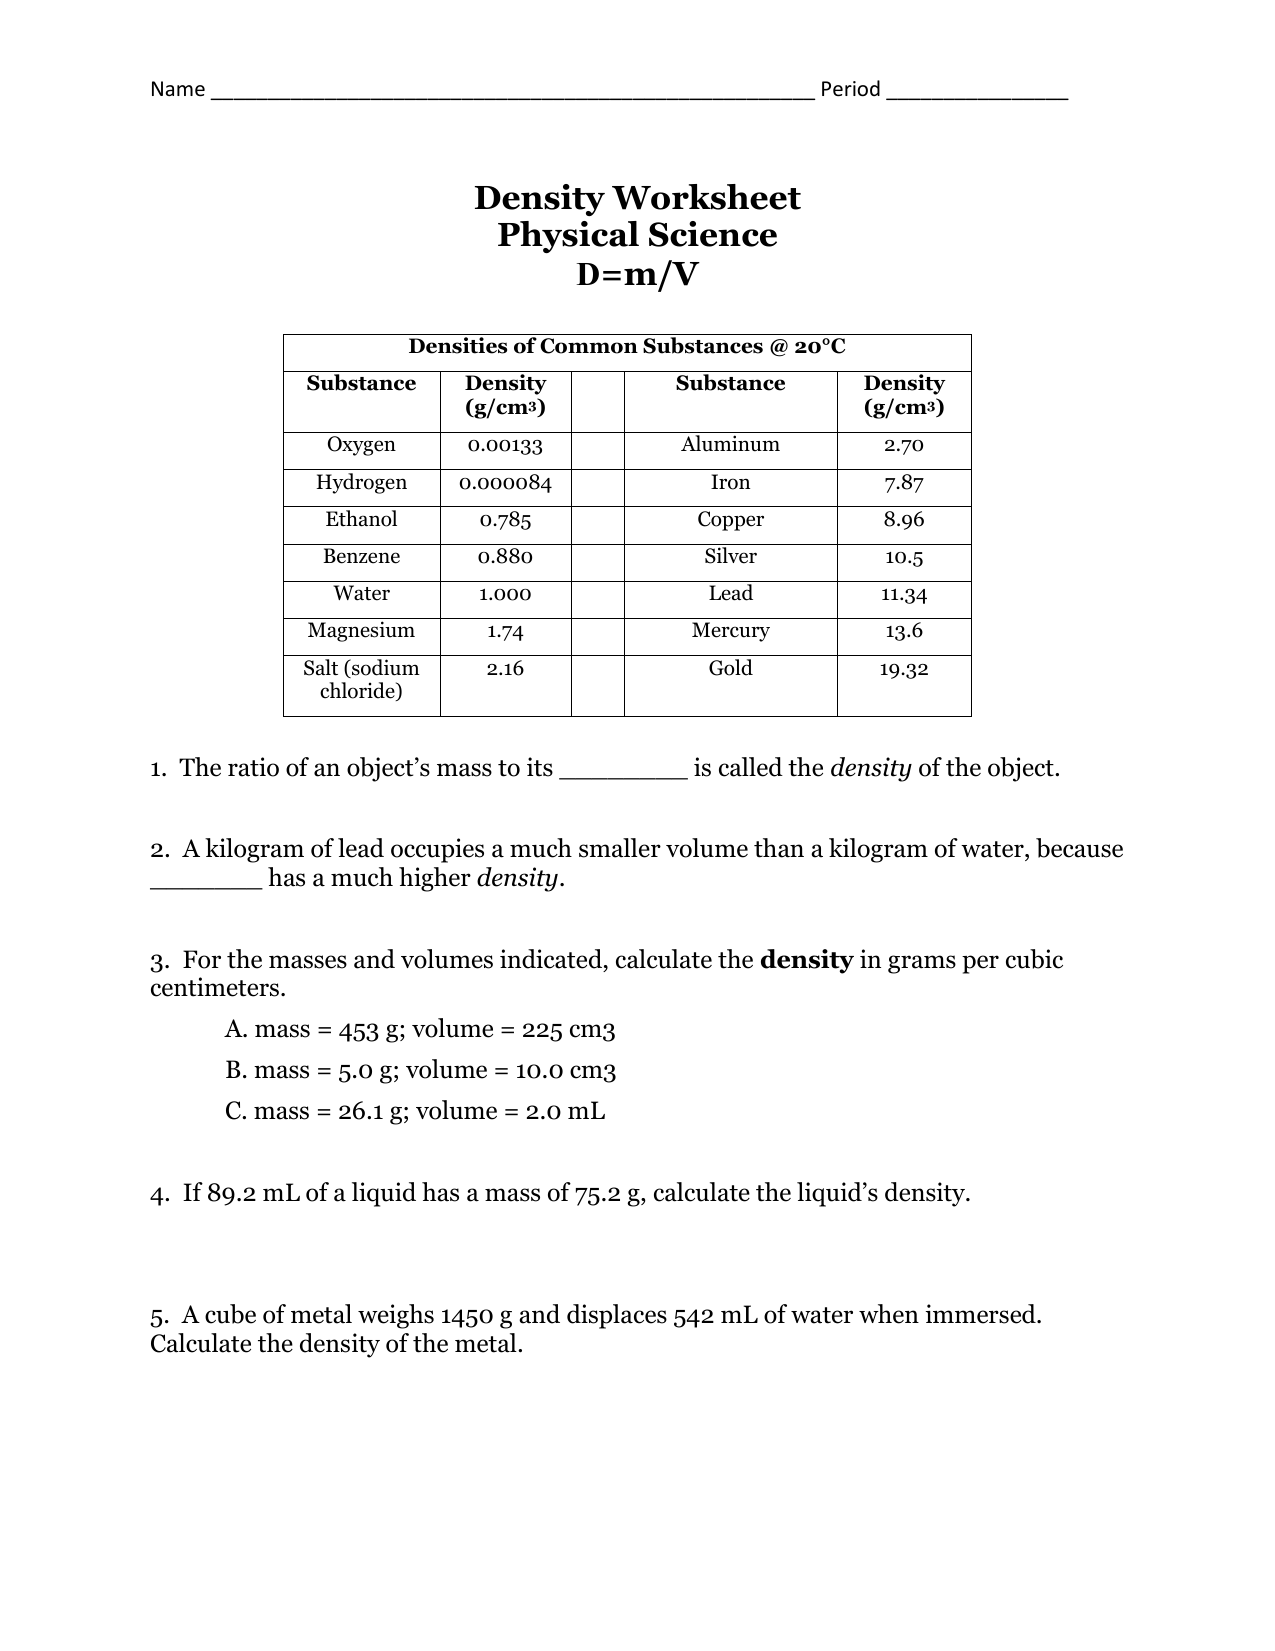 Physical Science Worksheet Answers The Best Worksheets Image